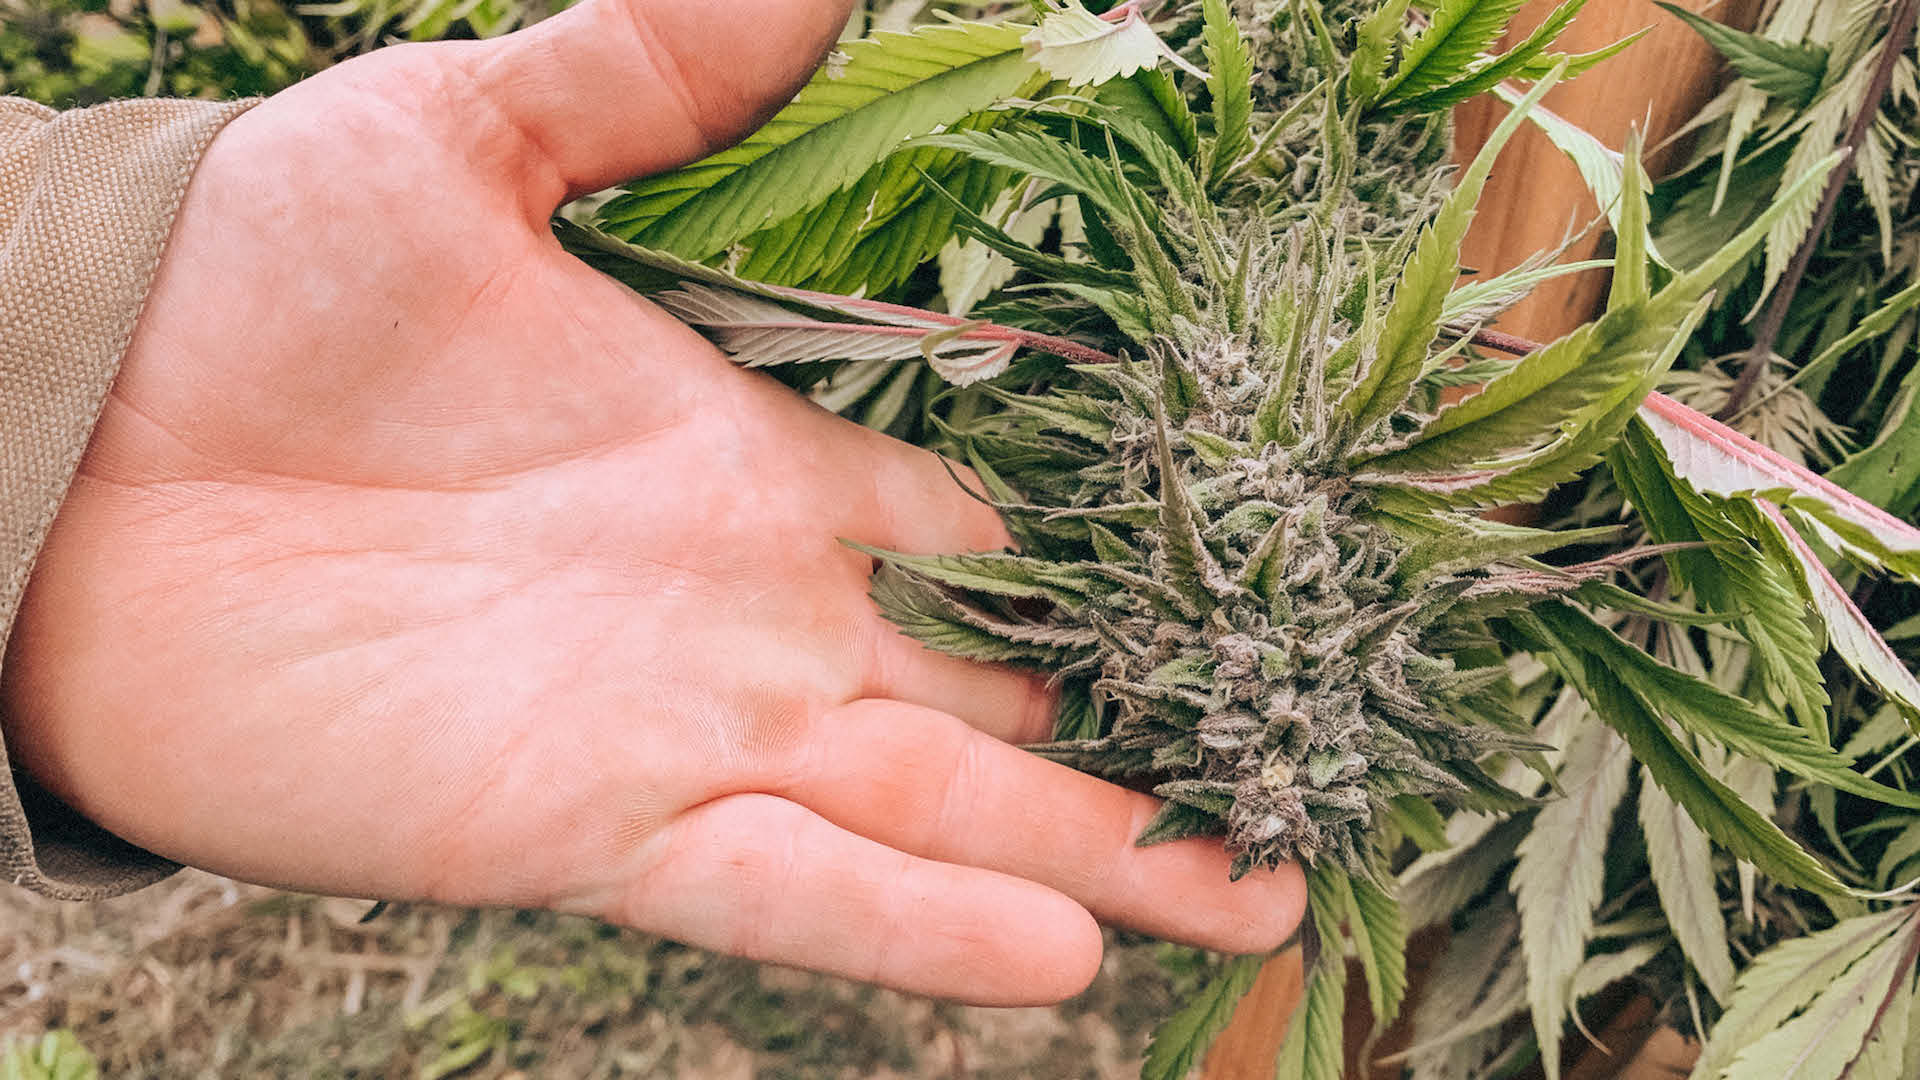 Expert interview: The science of saving those terps at harvest